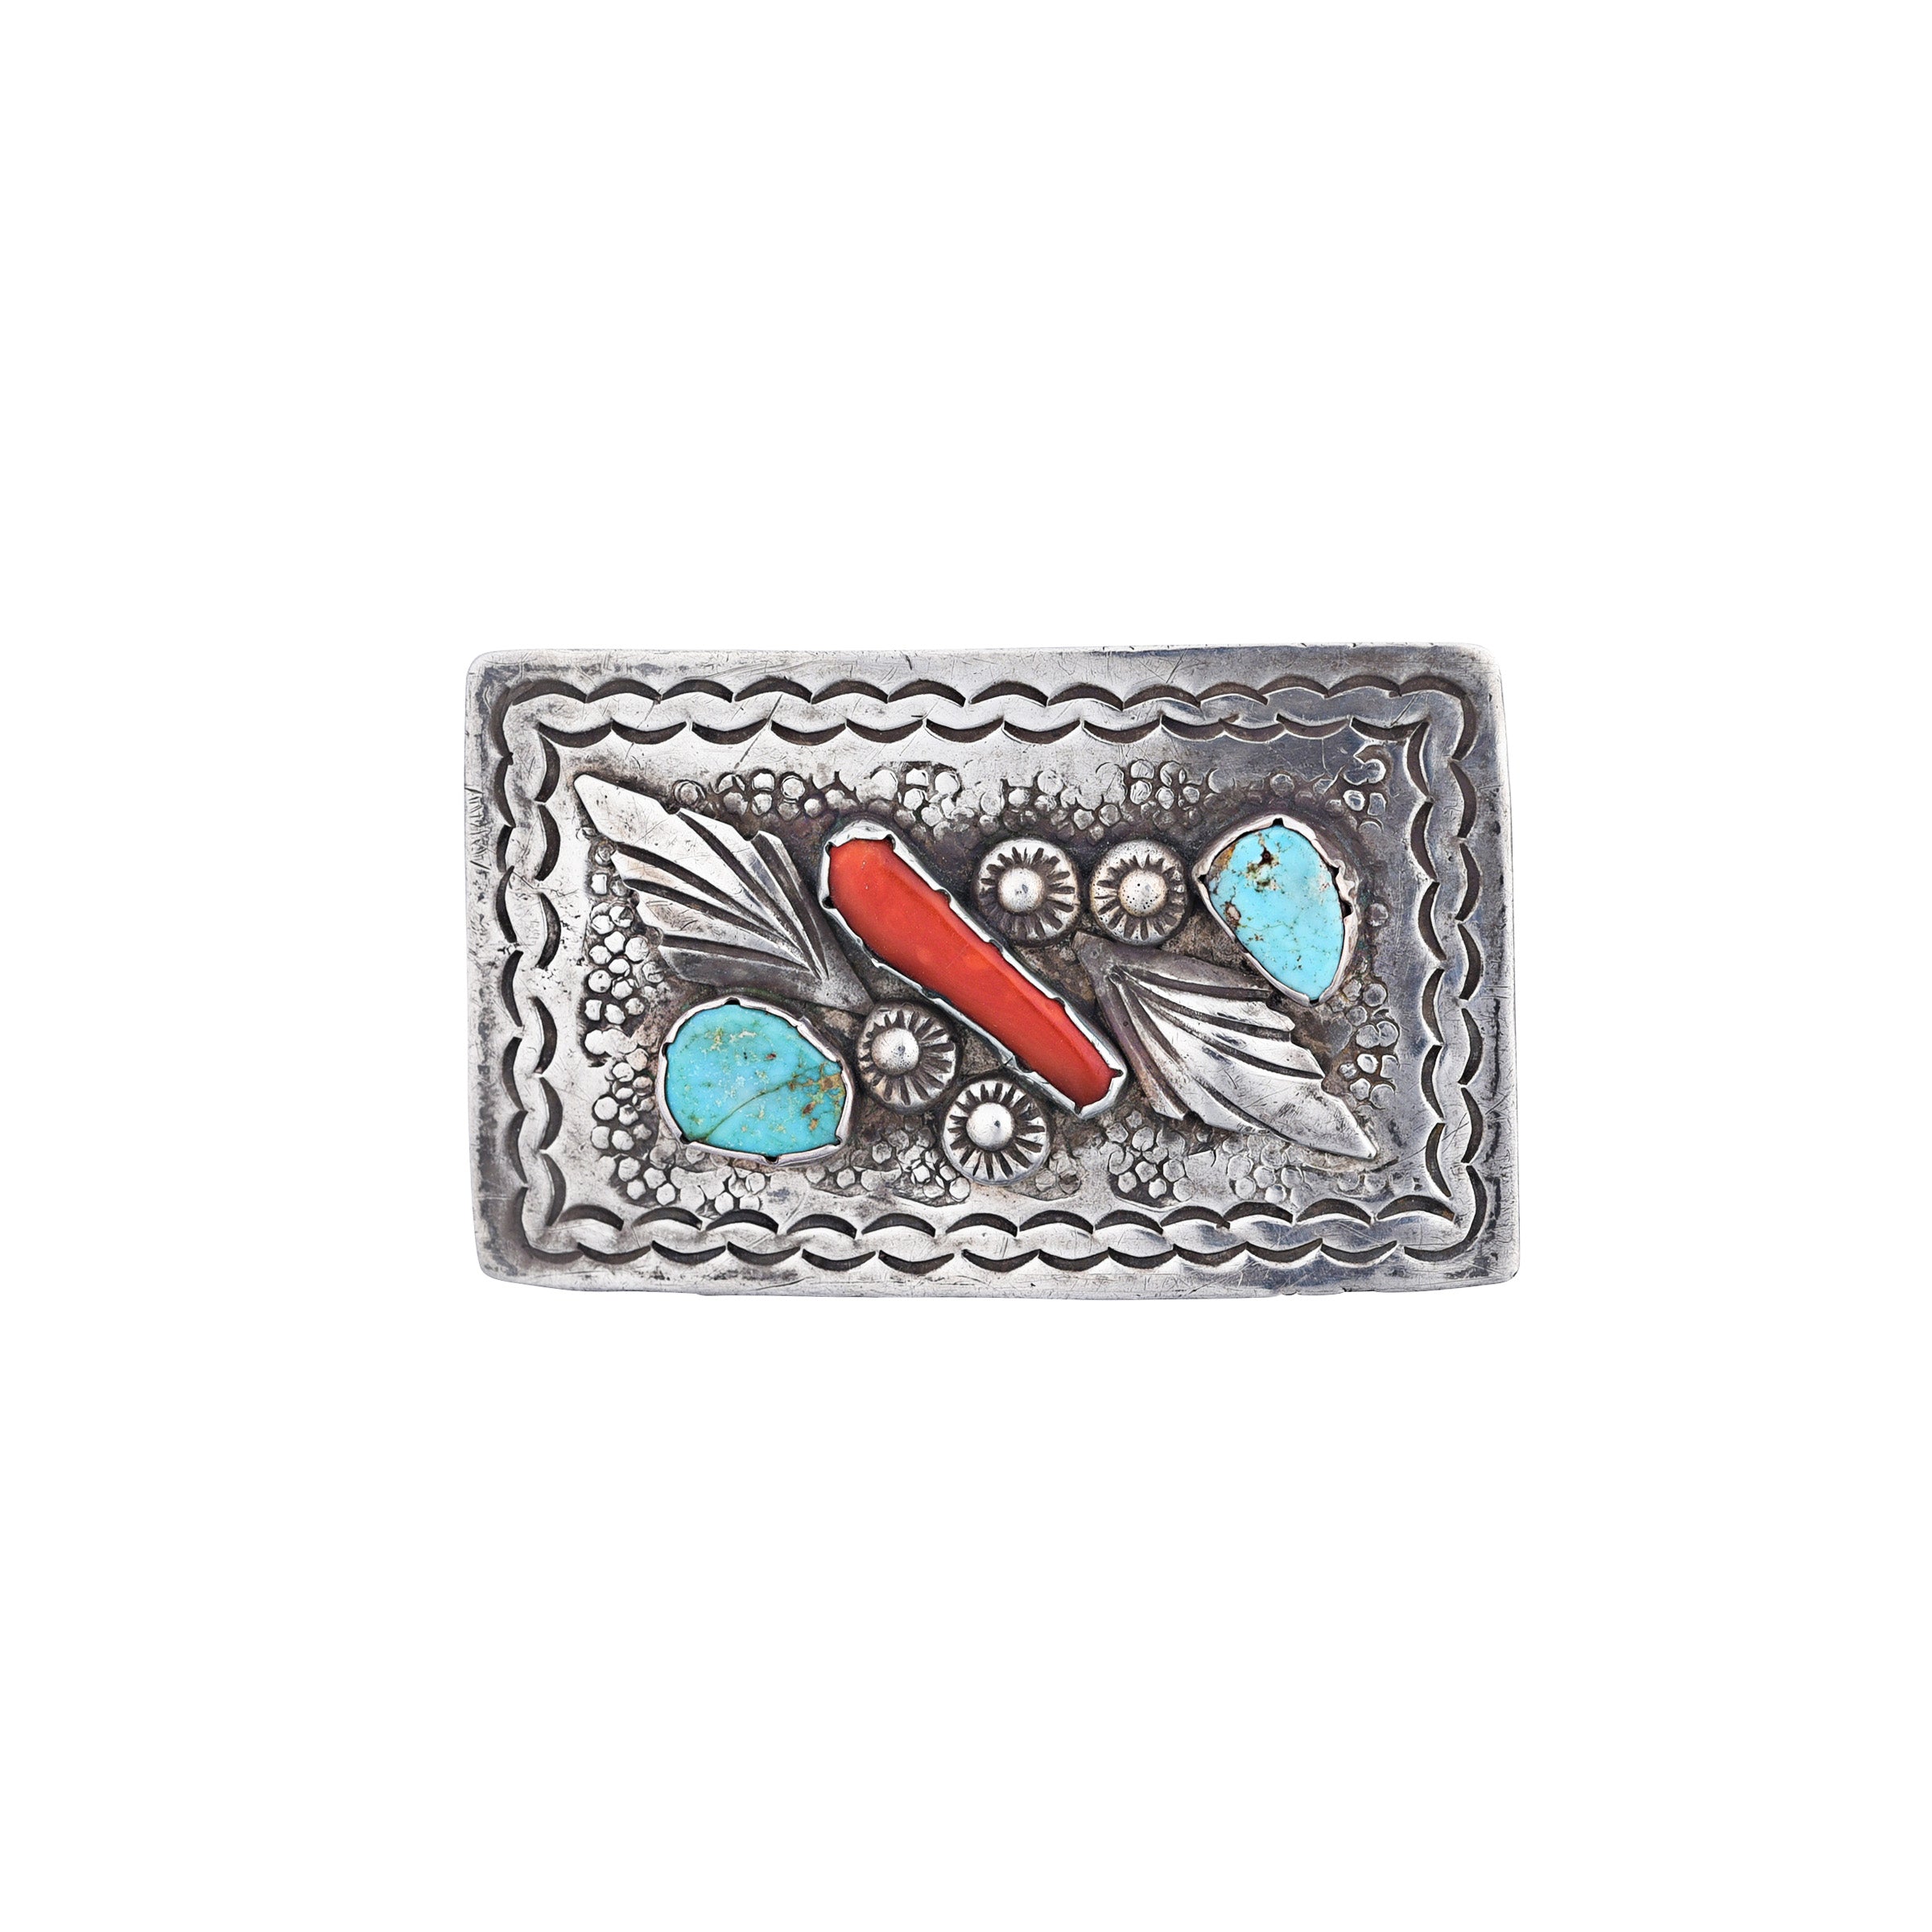 Vintage Coral And Turquoise Belt Buckle